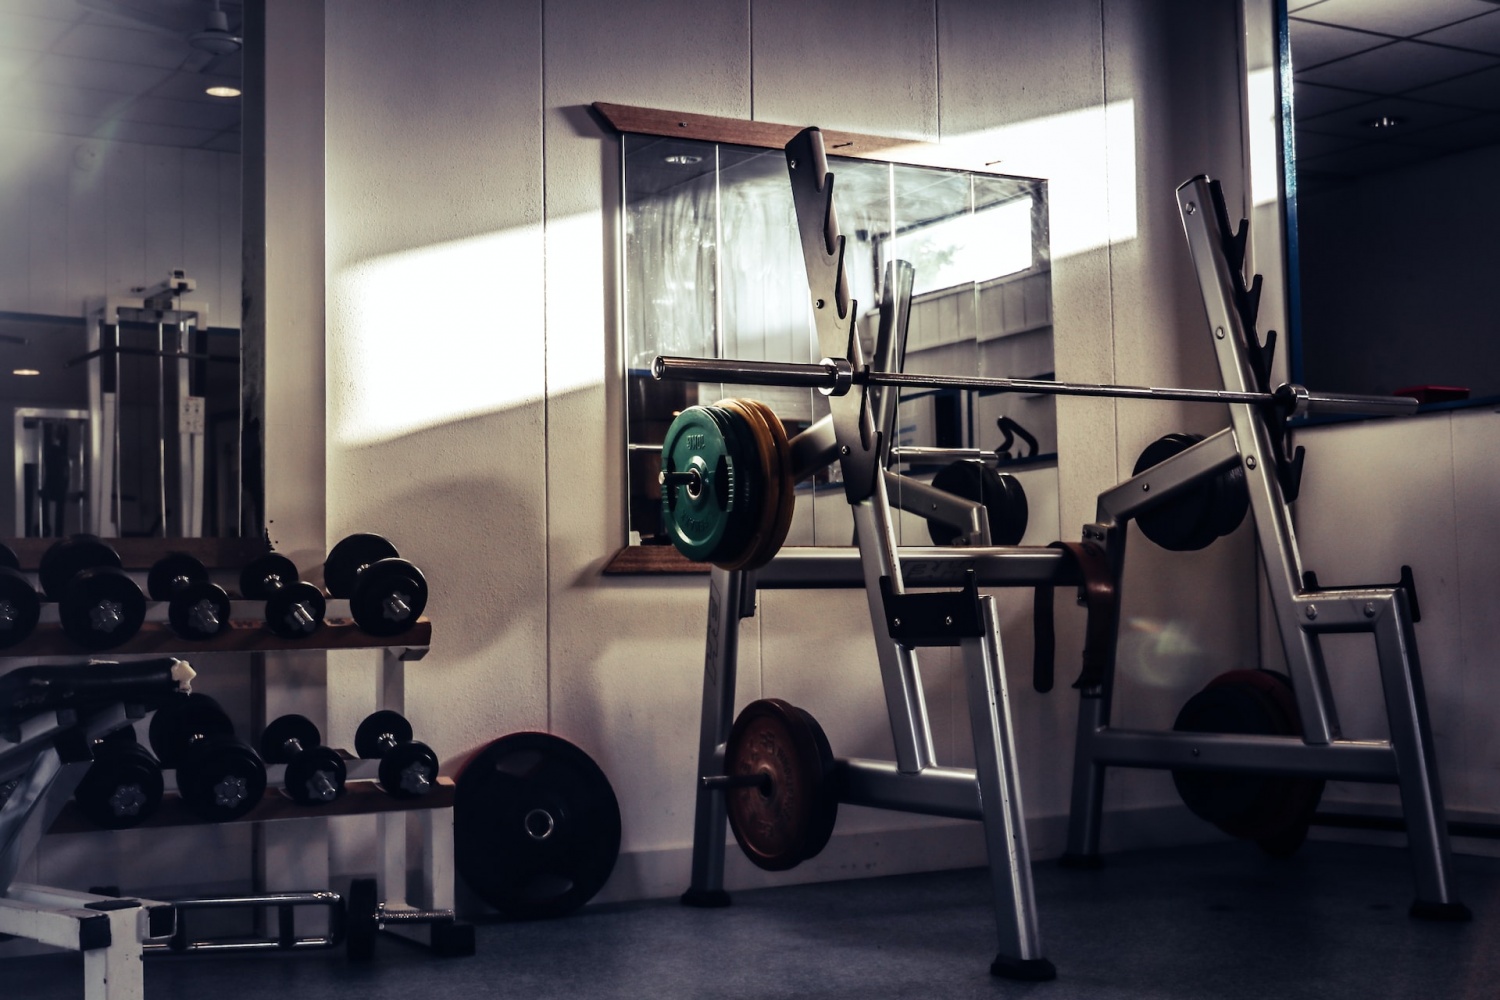 Using the gym in the apartment for health and fitness